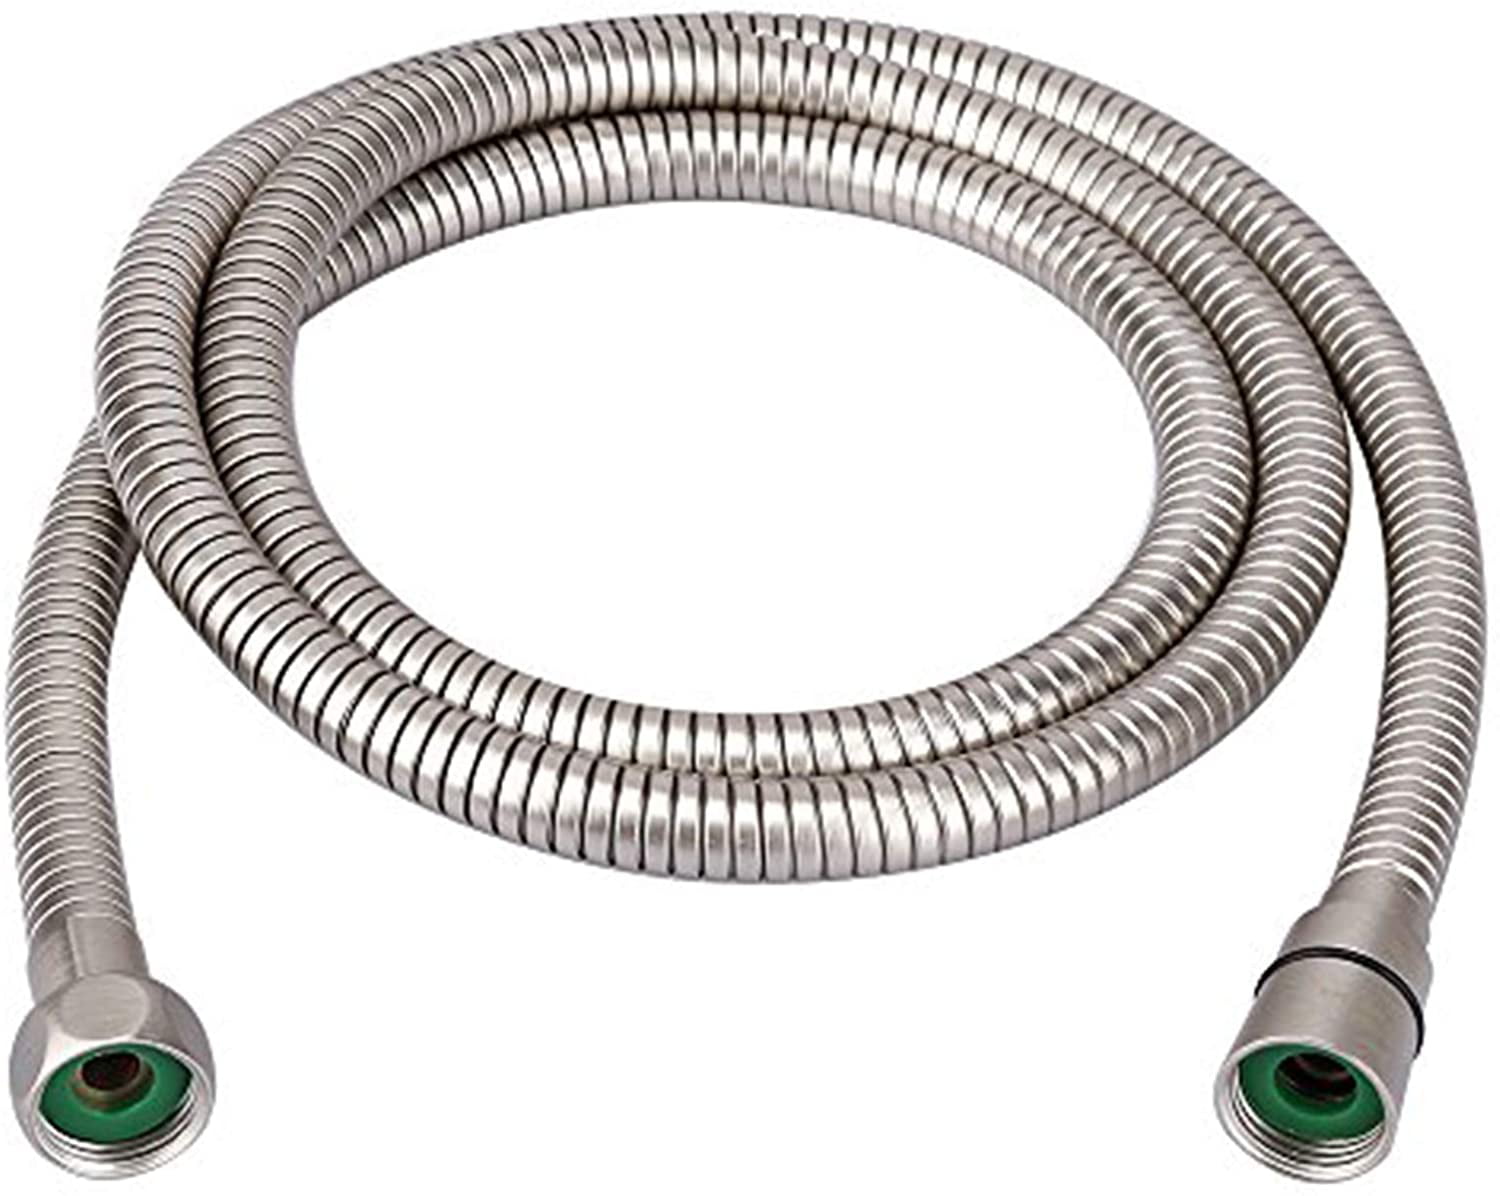 59" 79" Bath Shower Head Hose Pipe Stainless Steel Flexible Replacement Hose 